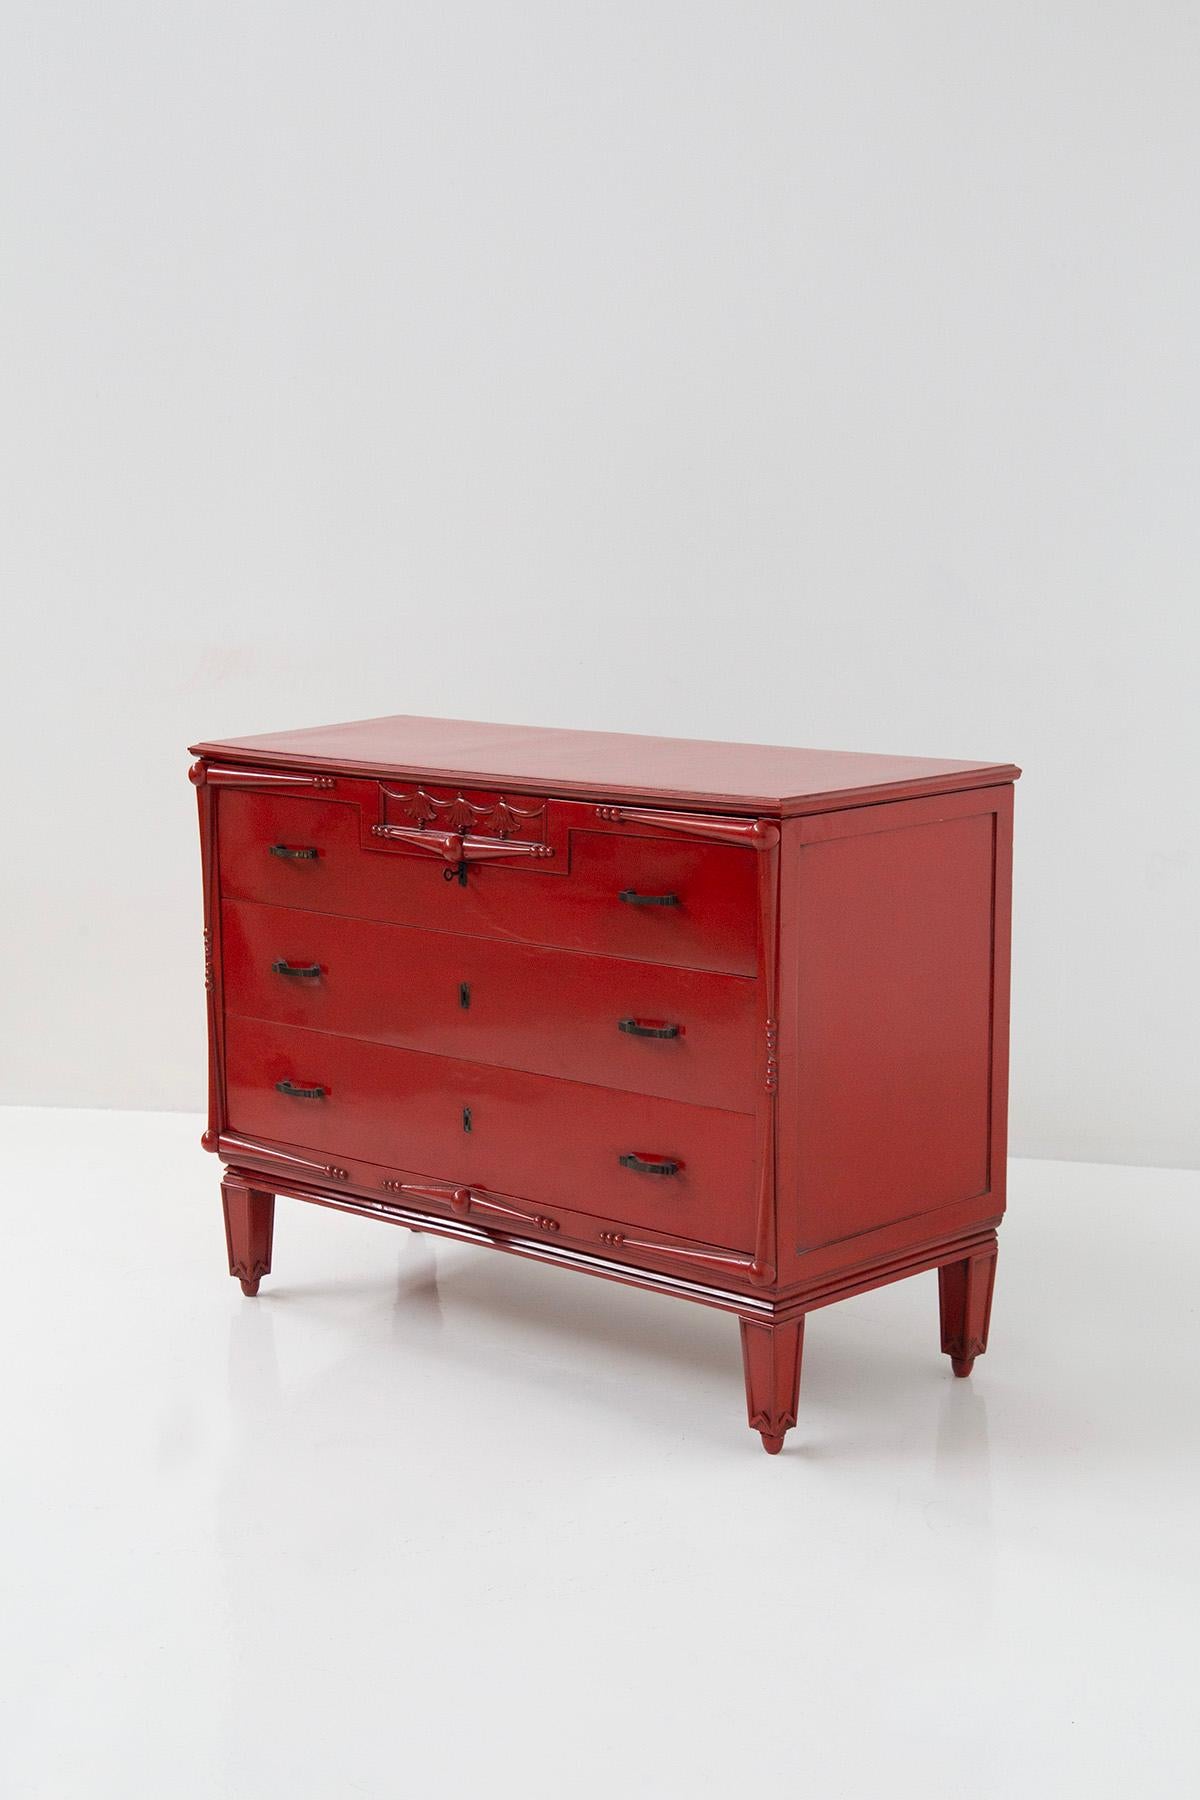 Early 20th Century Italian Red Chest of Drawers Attributed. a Piero Portalupi For Sale